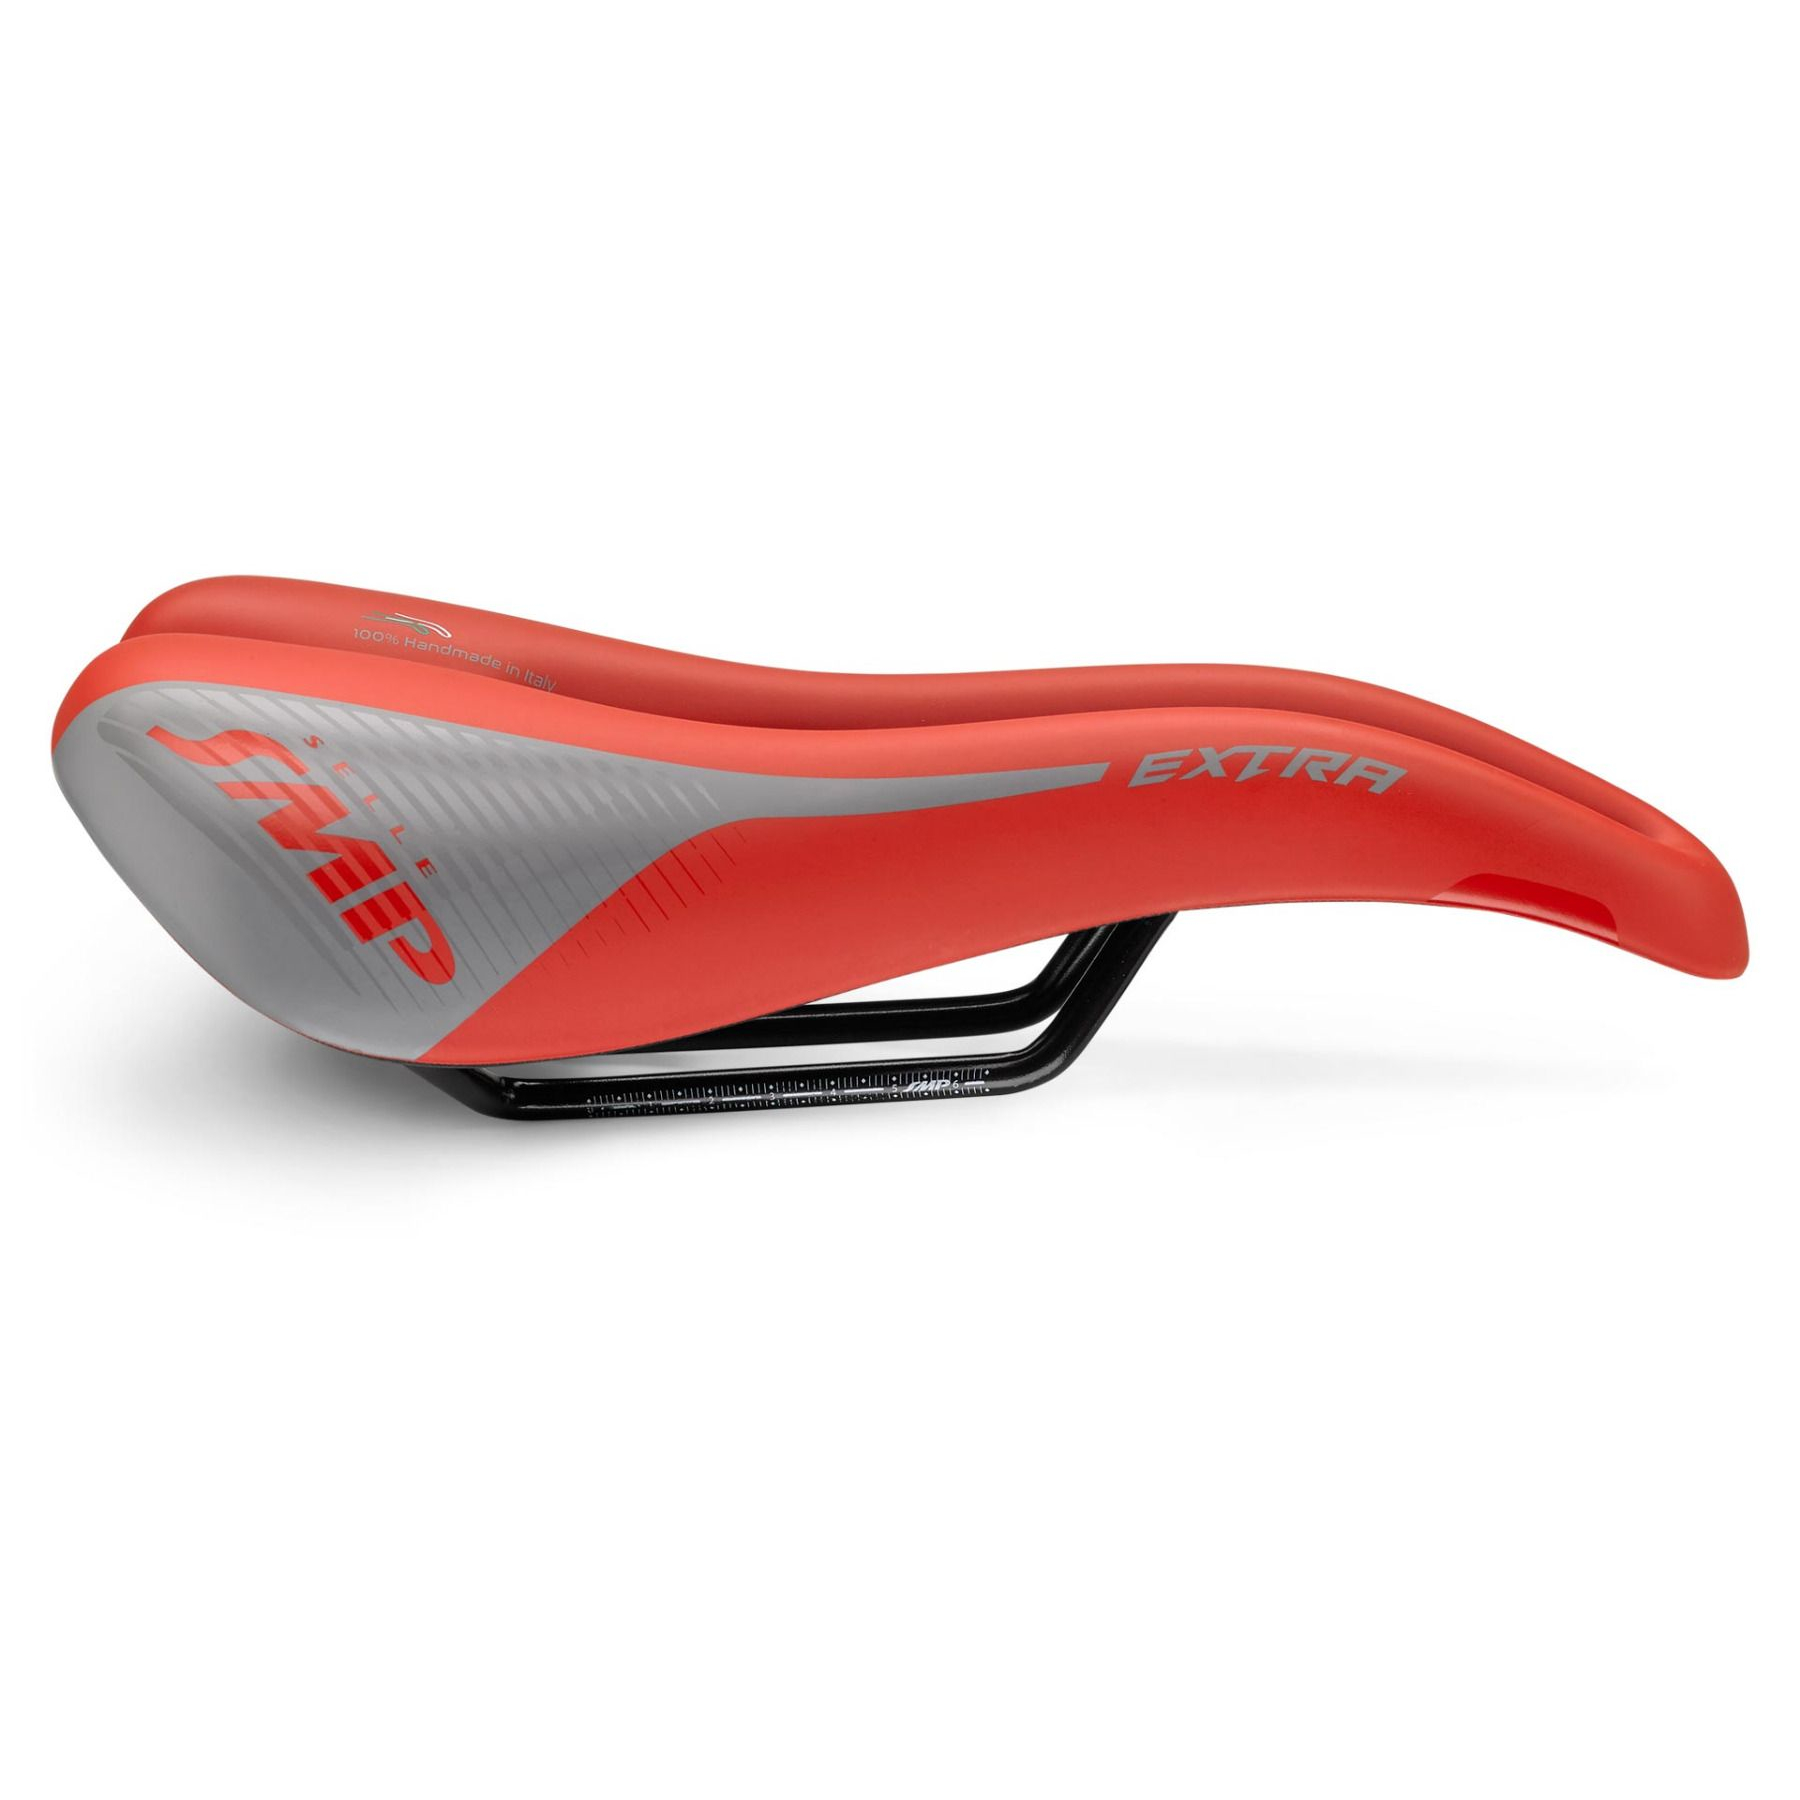 Selle SMP Extra Saddle - red | BIKE24